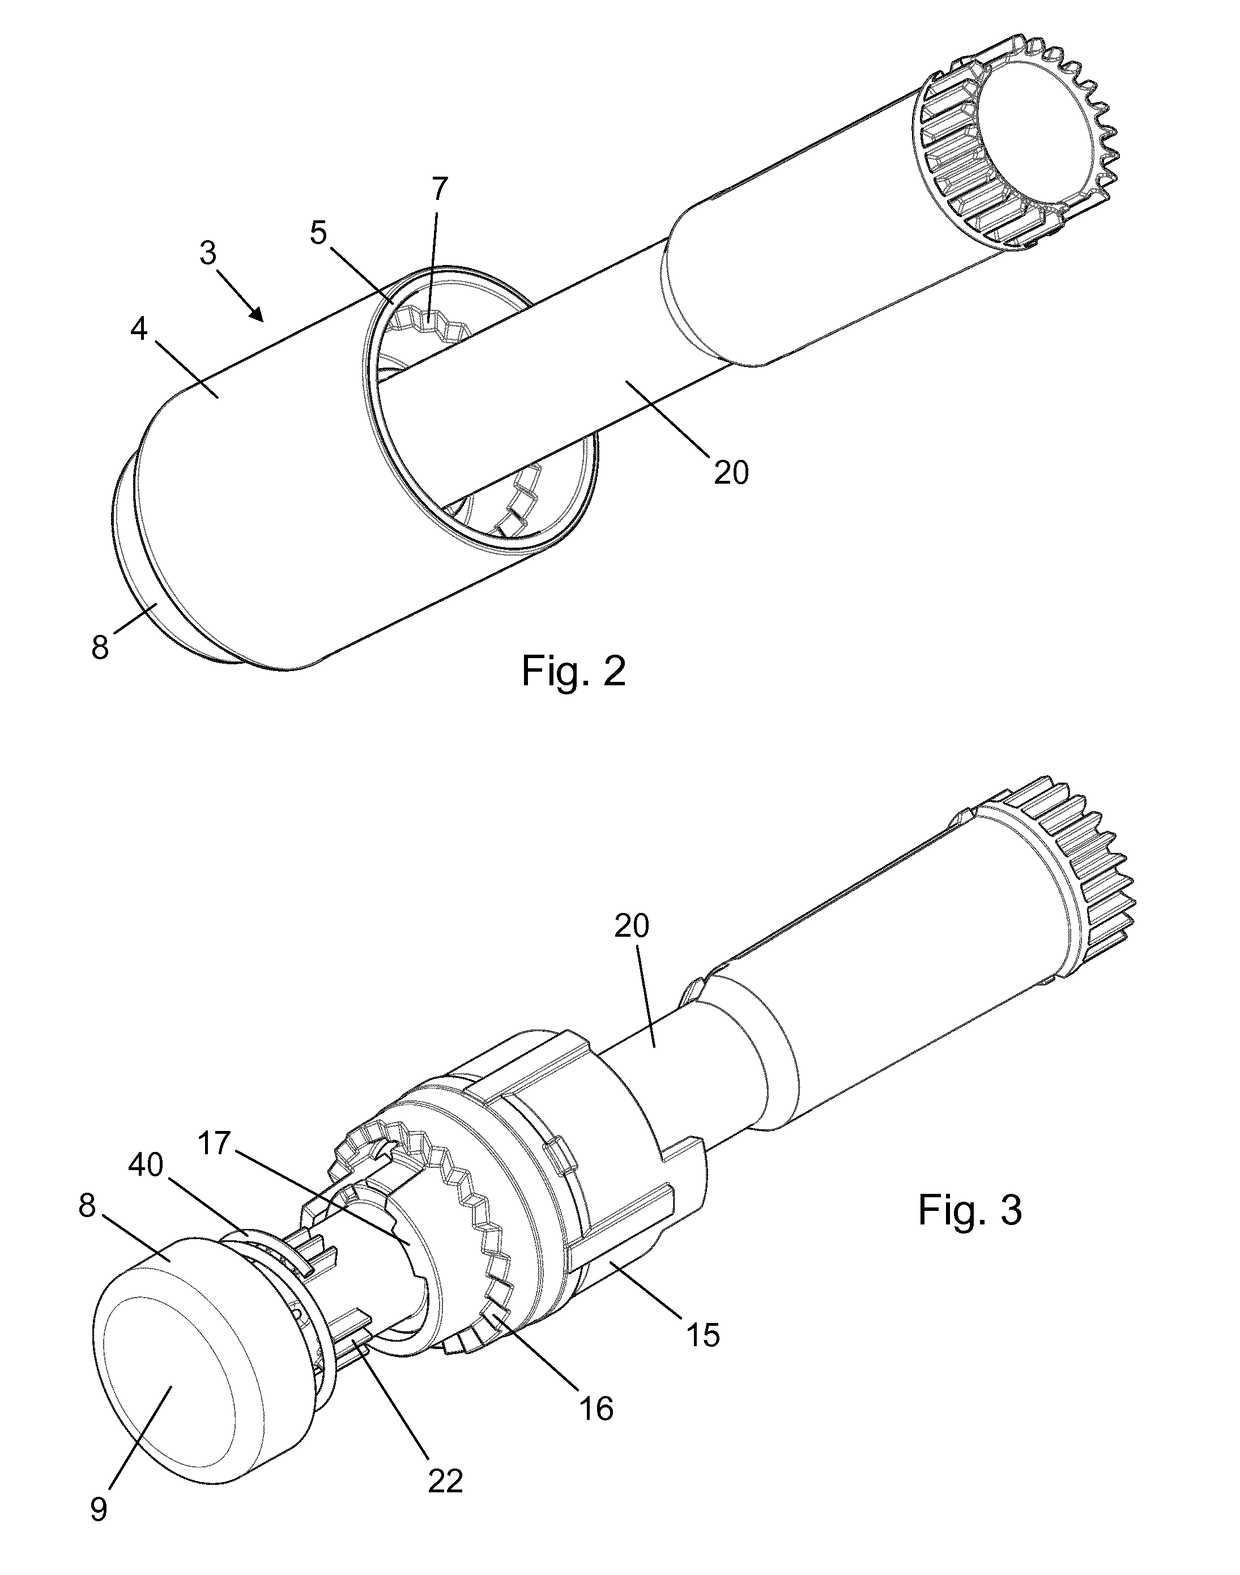 Drug Delivery Device with Multifunctional Bias Structure